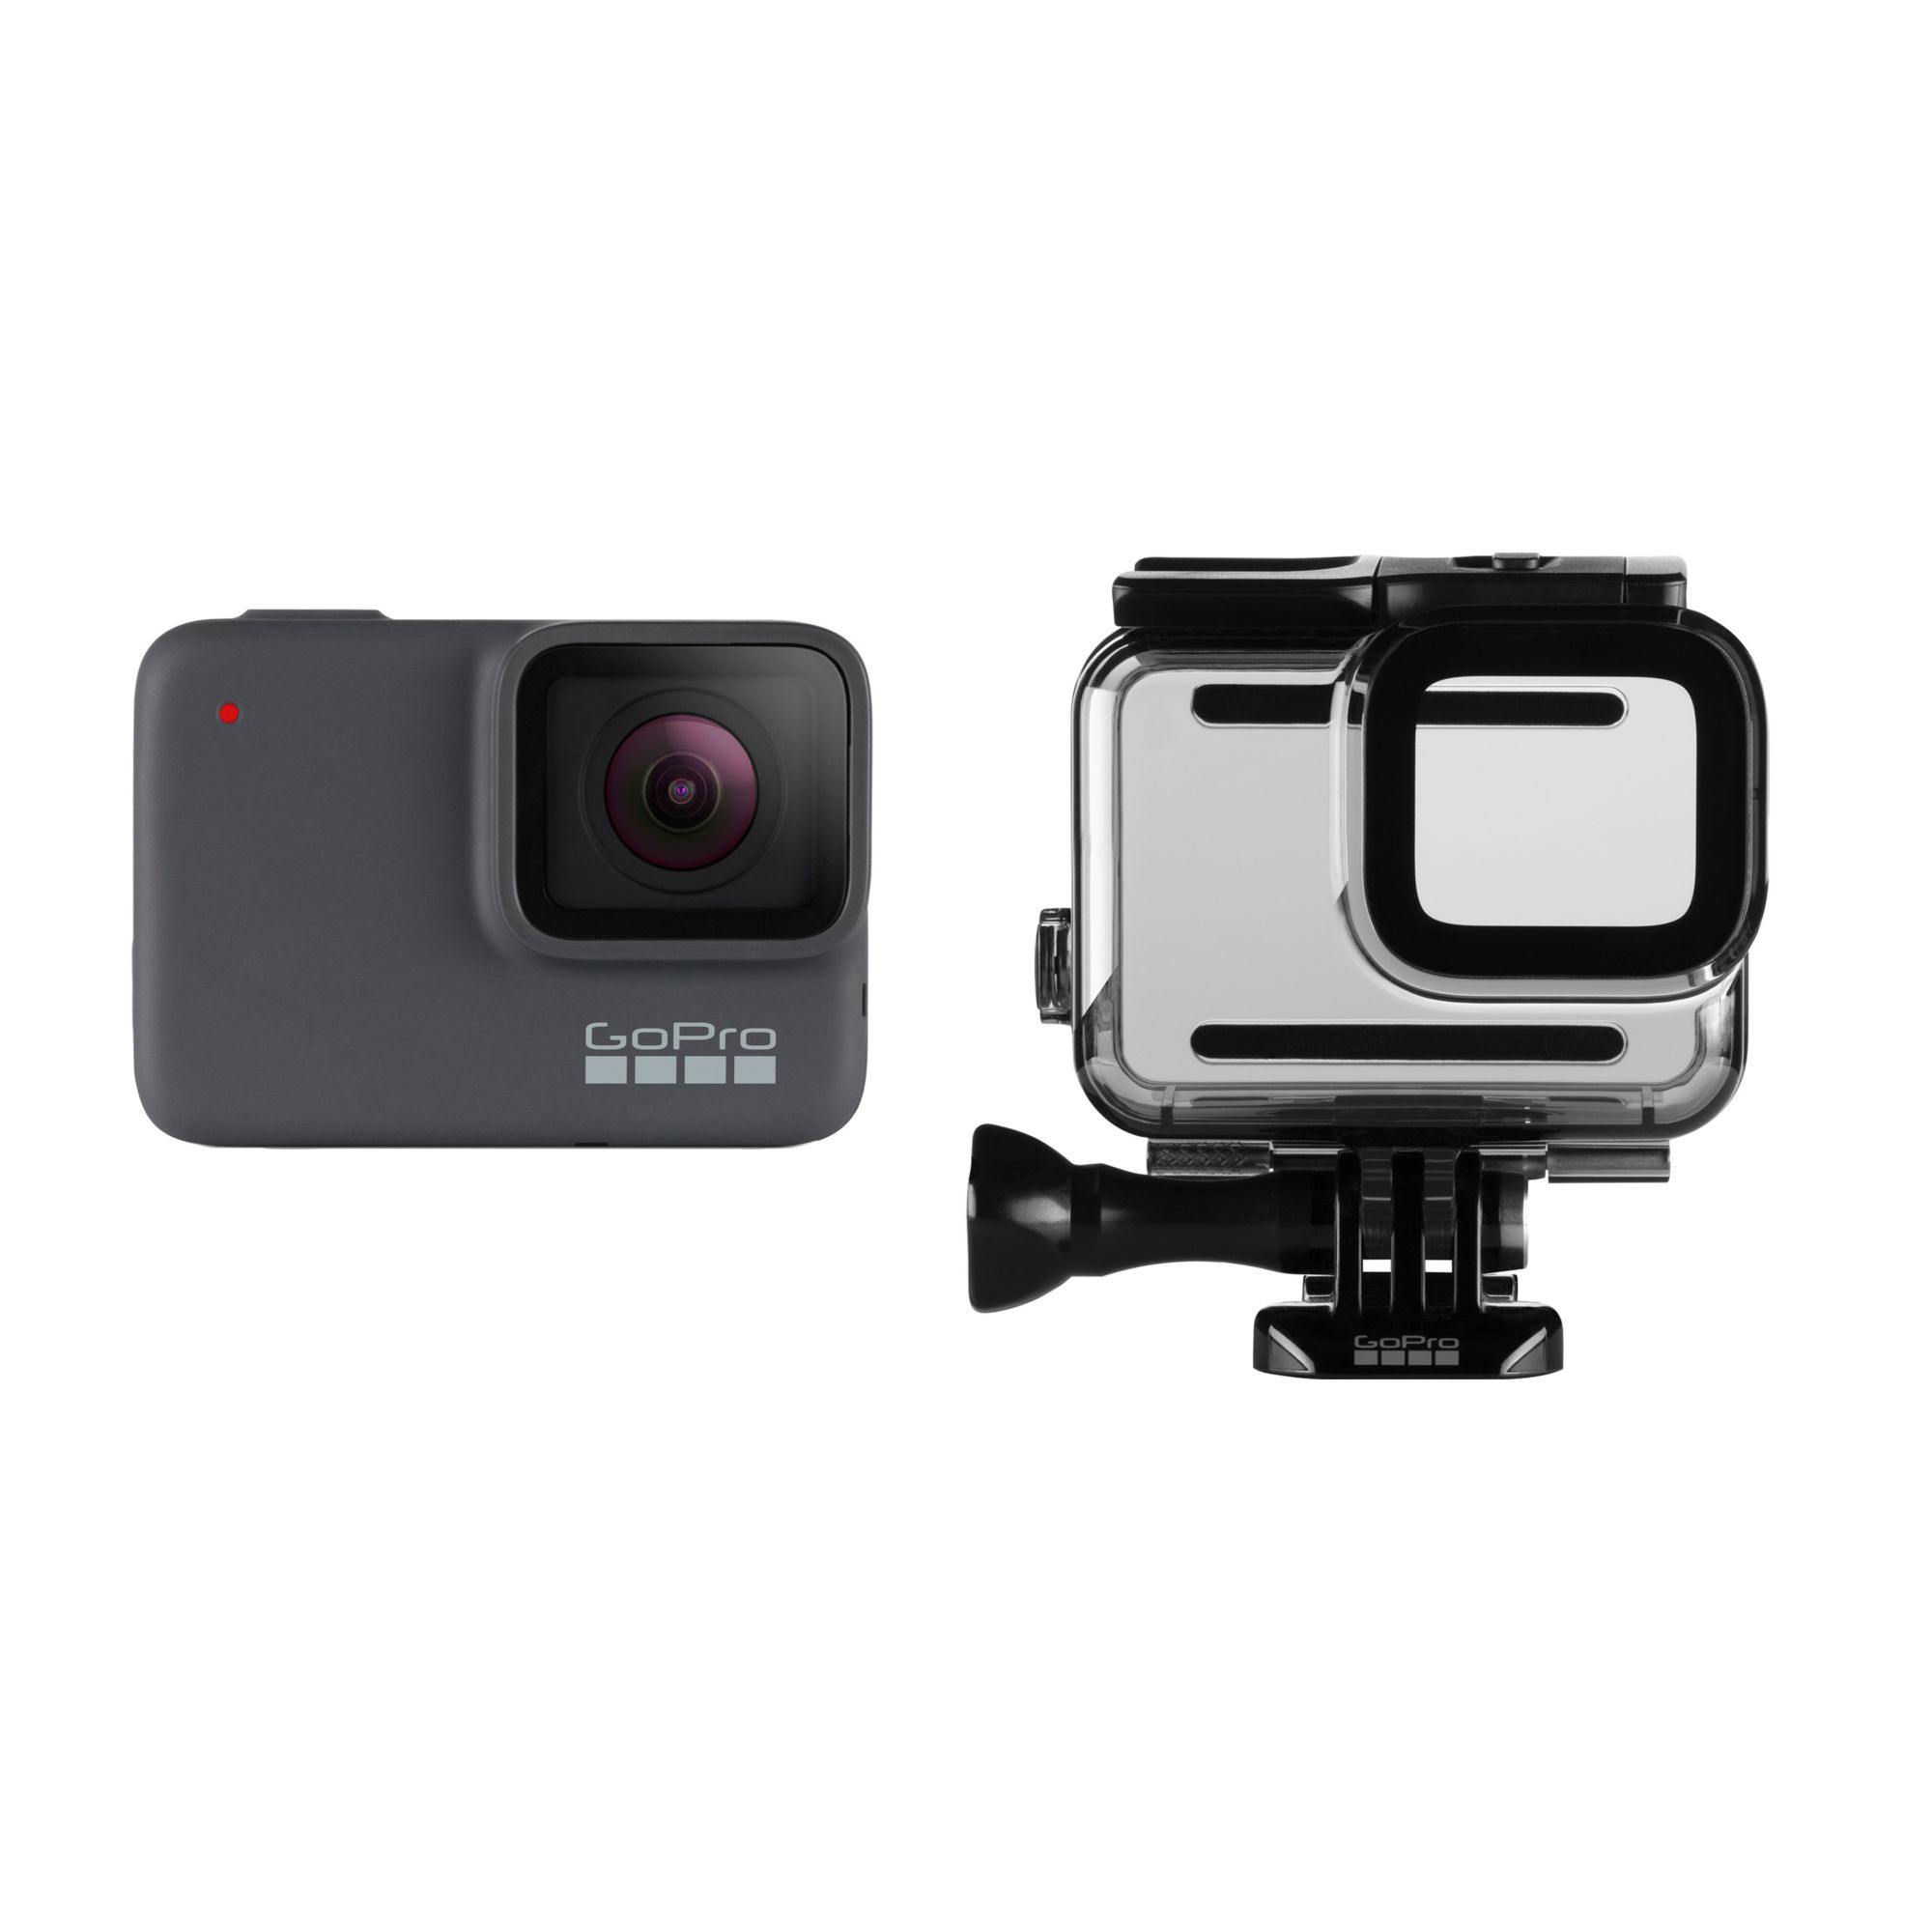 GoPro HERO7 Silver + Protective Housing on BJ's Wholesale Club |  AccuWeather Shop